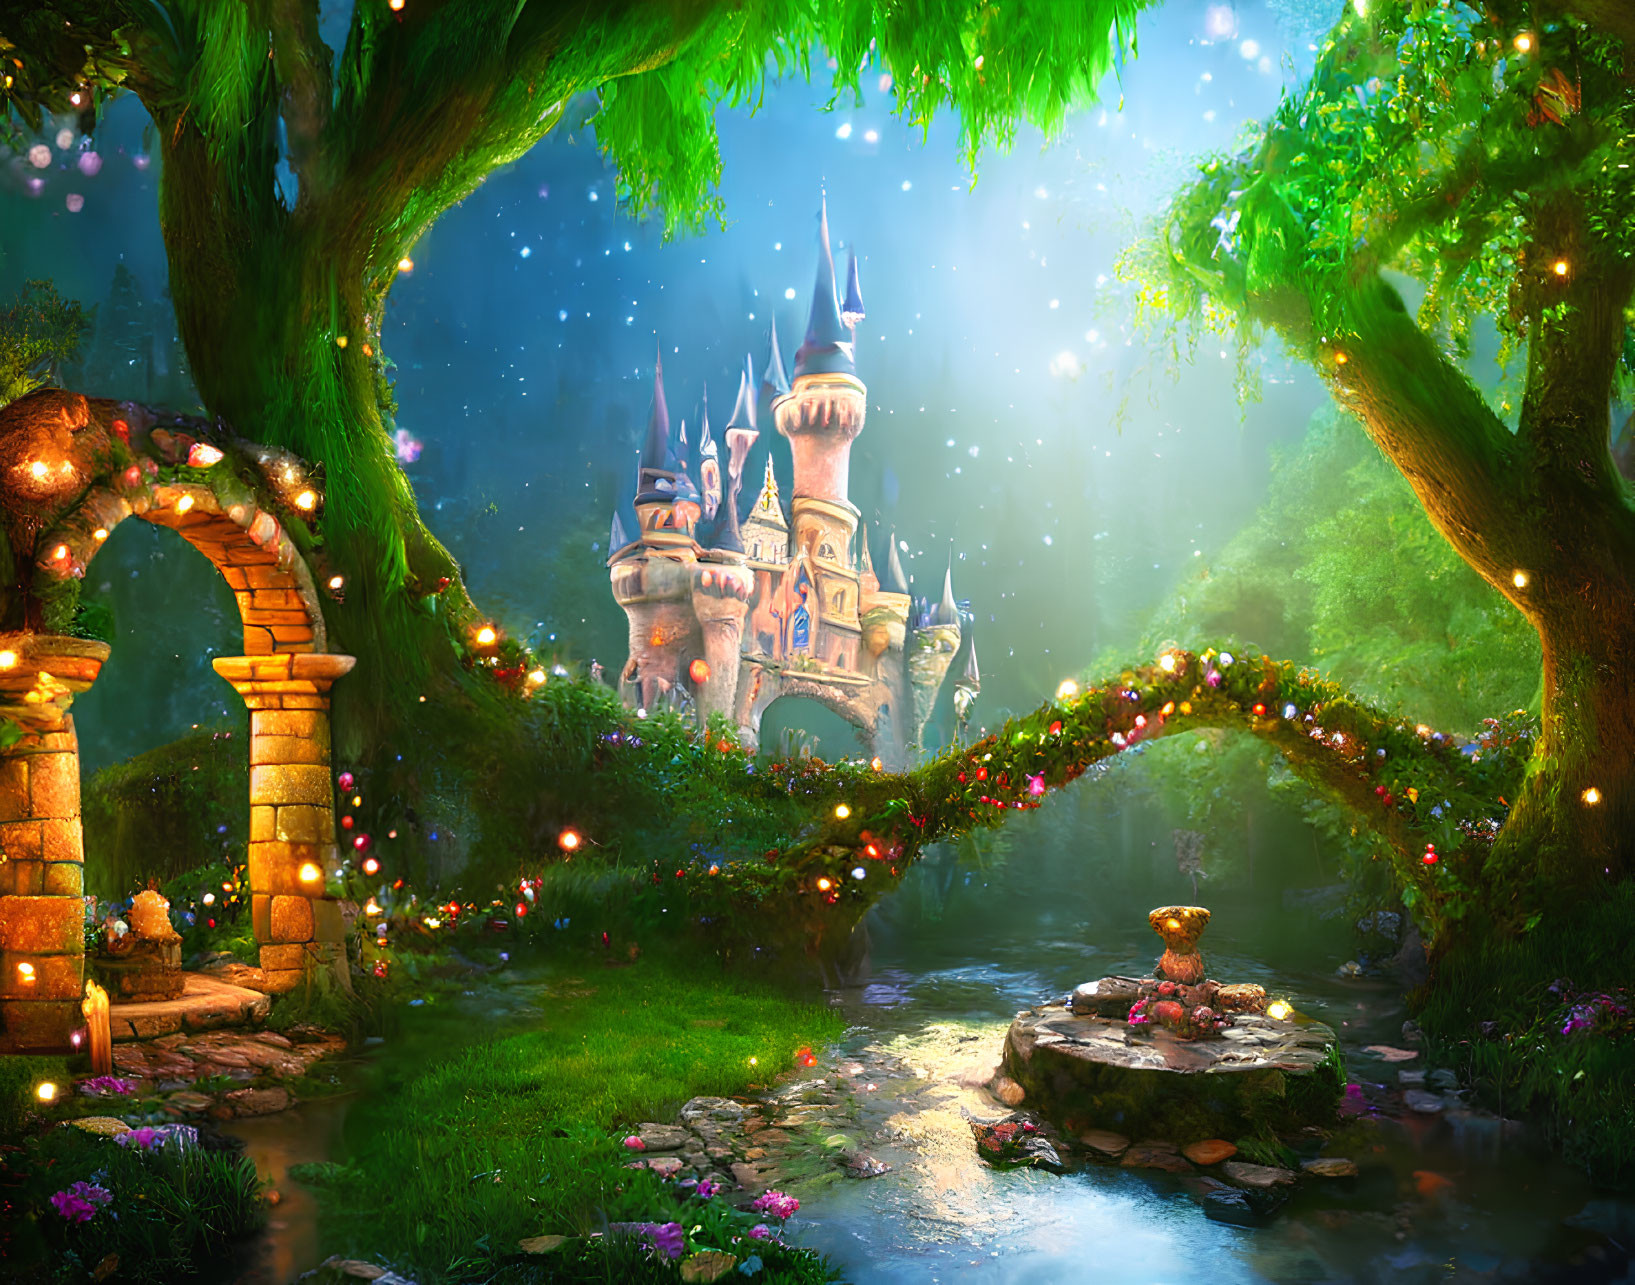 Whimsical fairy tale landscape with castle, glowing lights, stone bridge, and vibrant flora